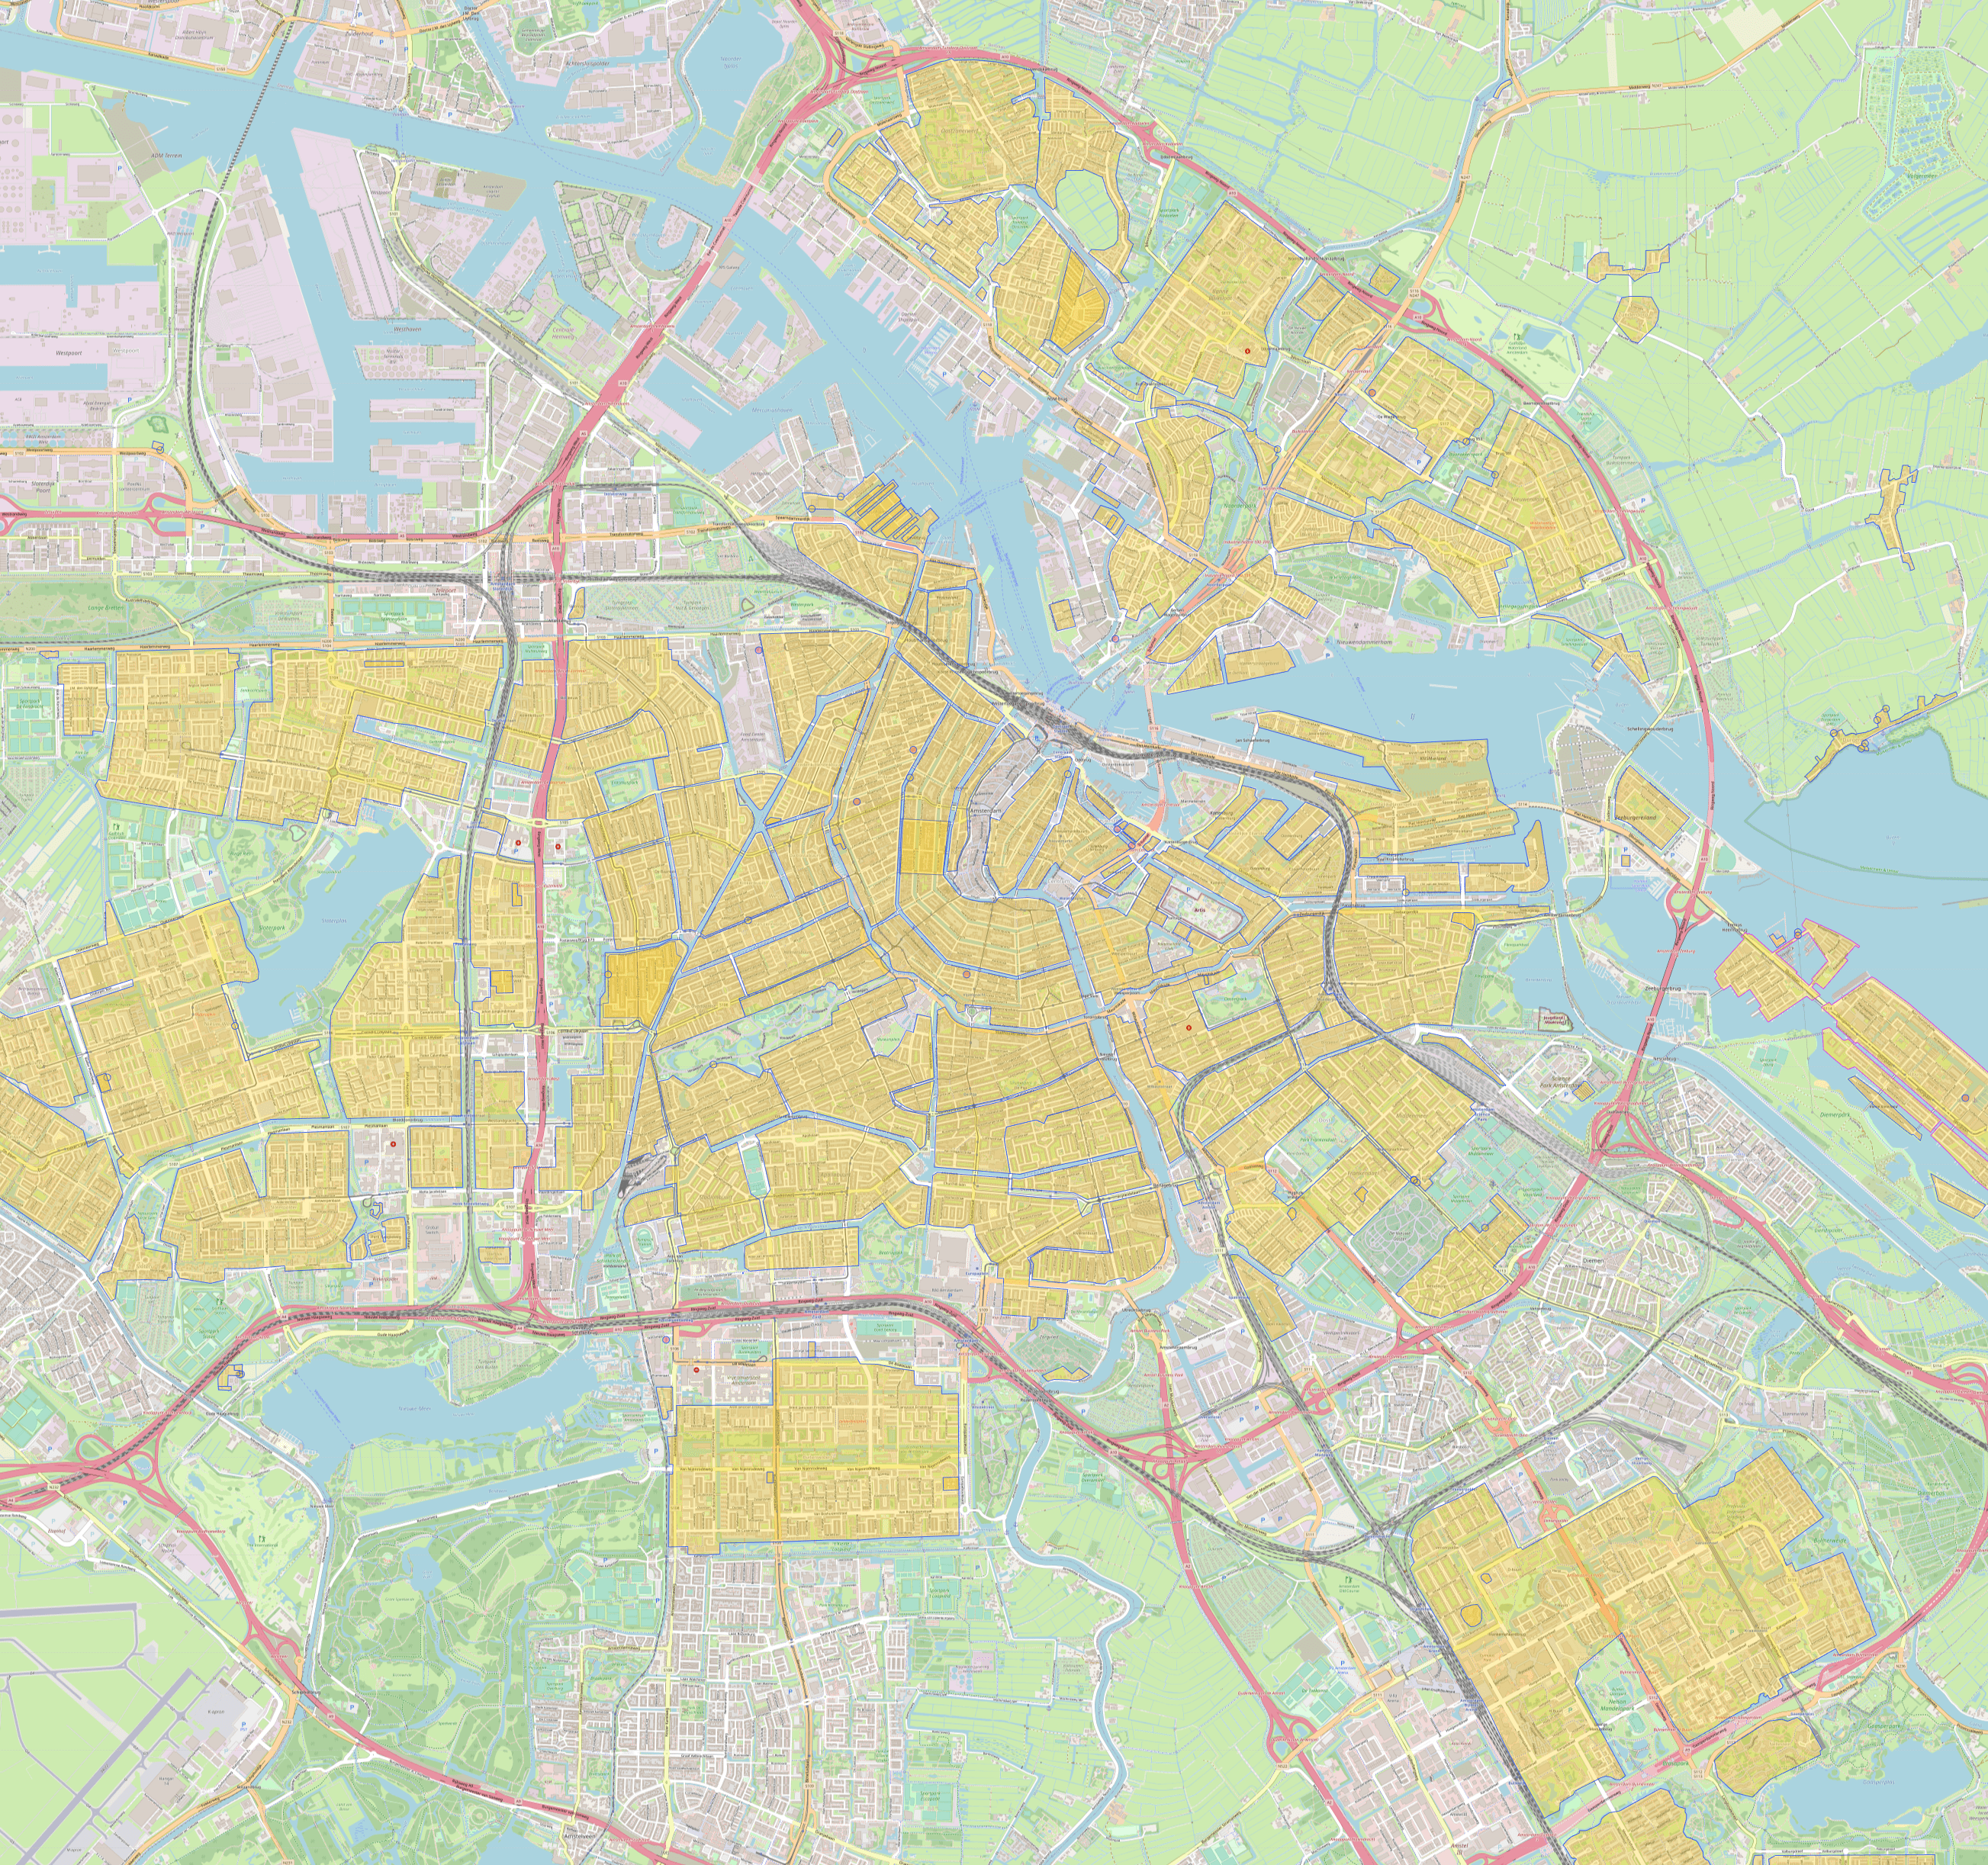 Residential Areas of Amsterdam